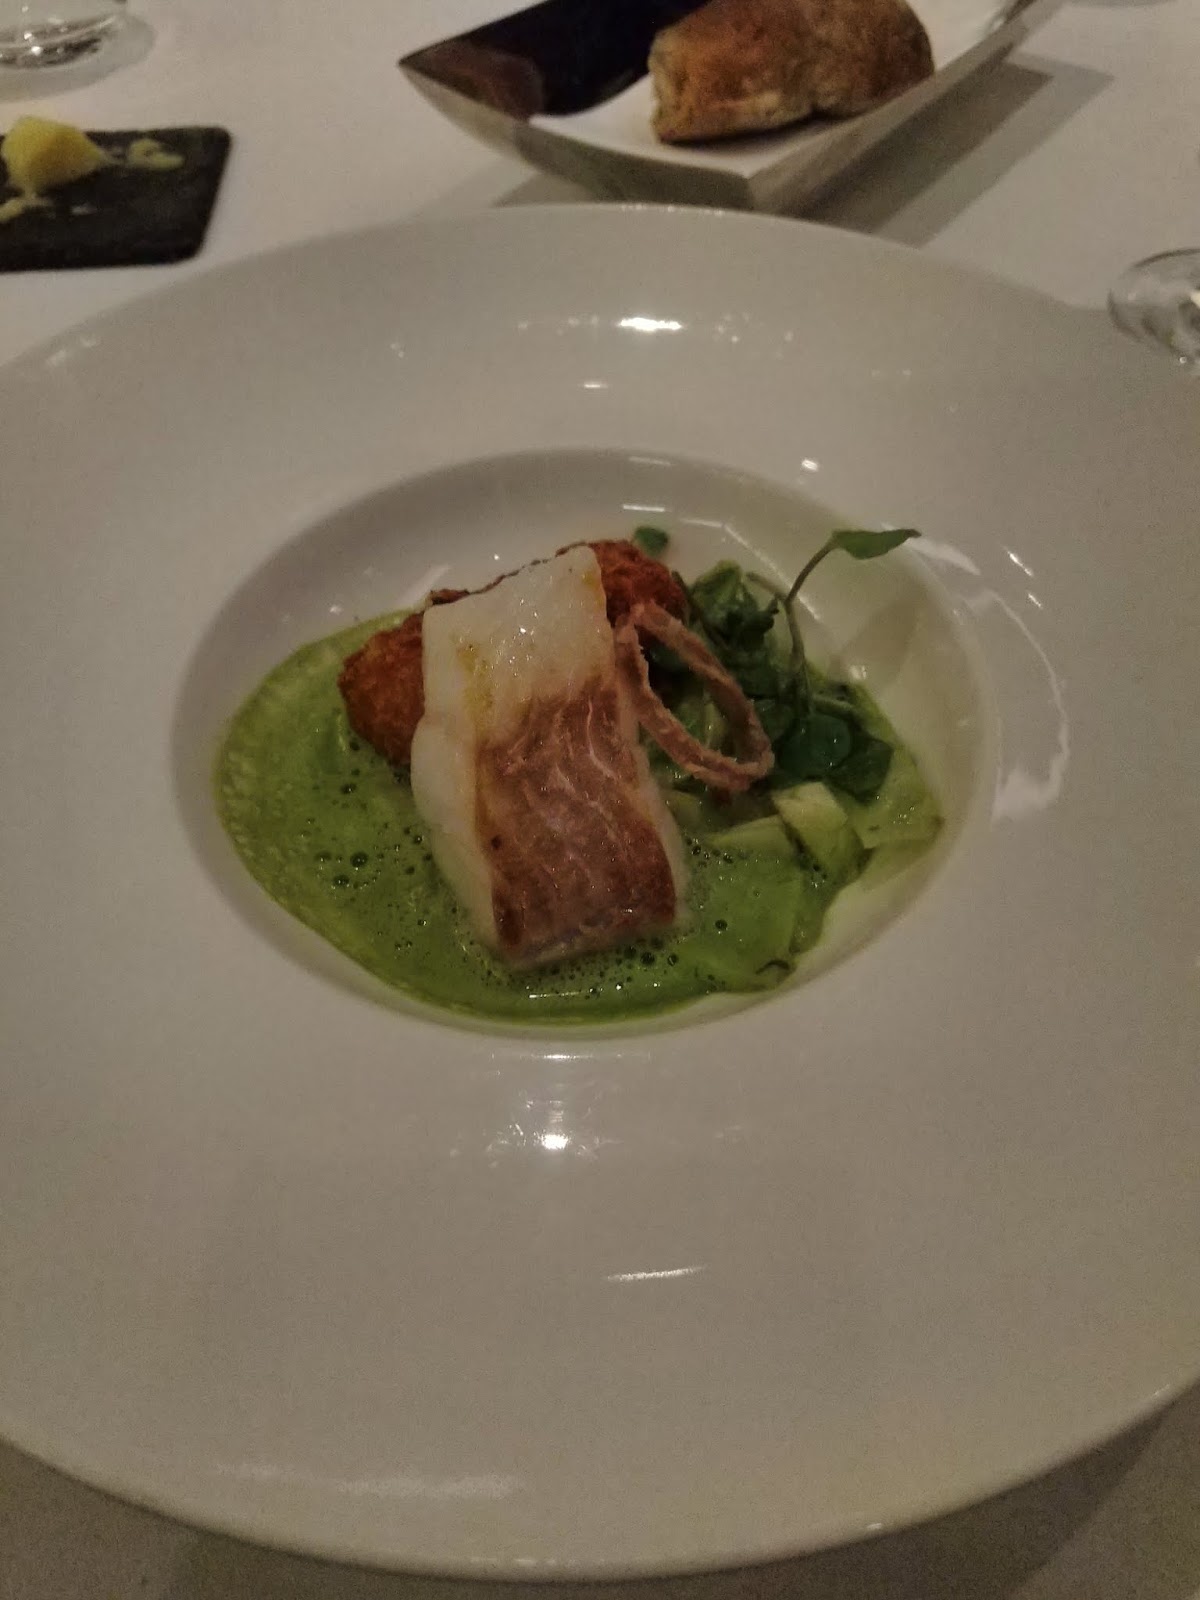 Roasted pollock, brandade croquette & watercress veloute at Galvin at Windows